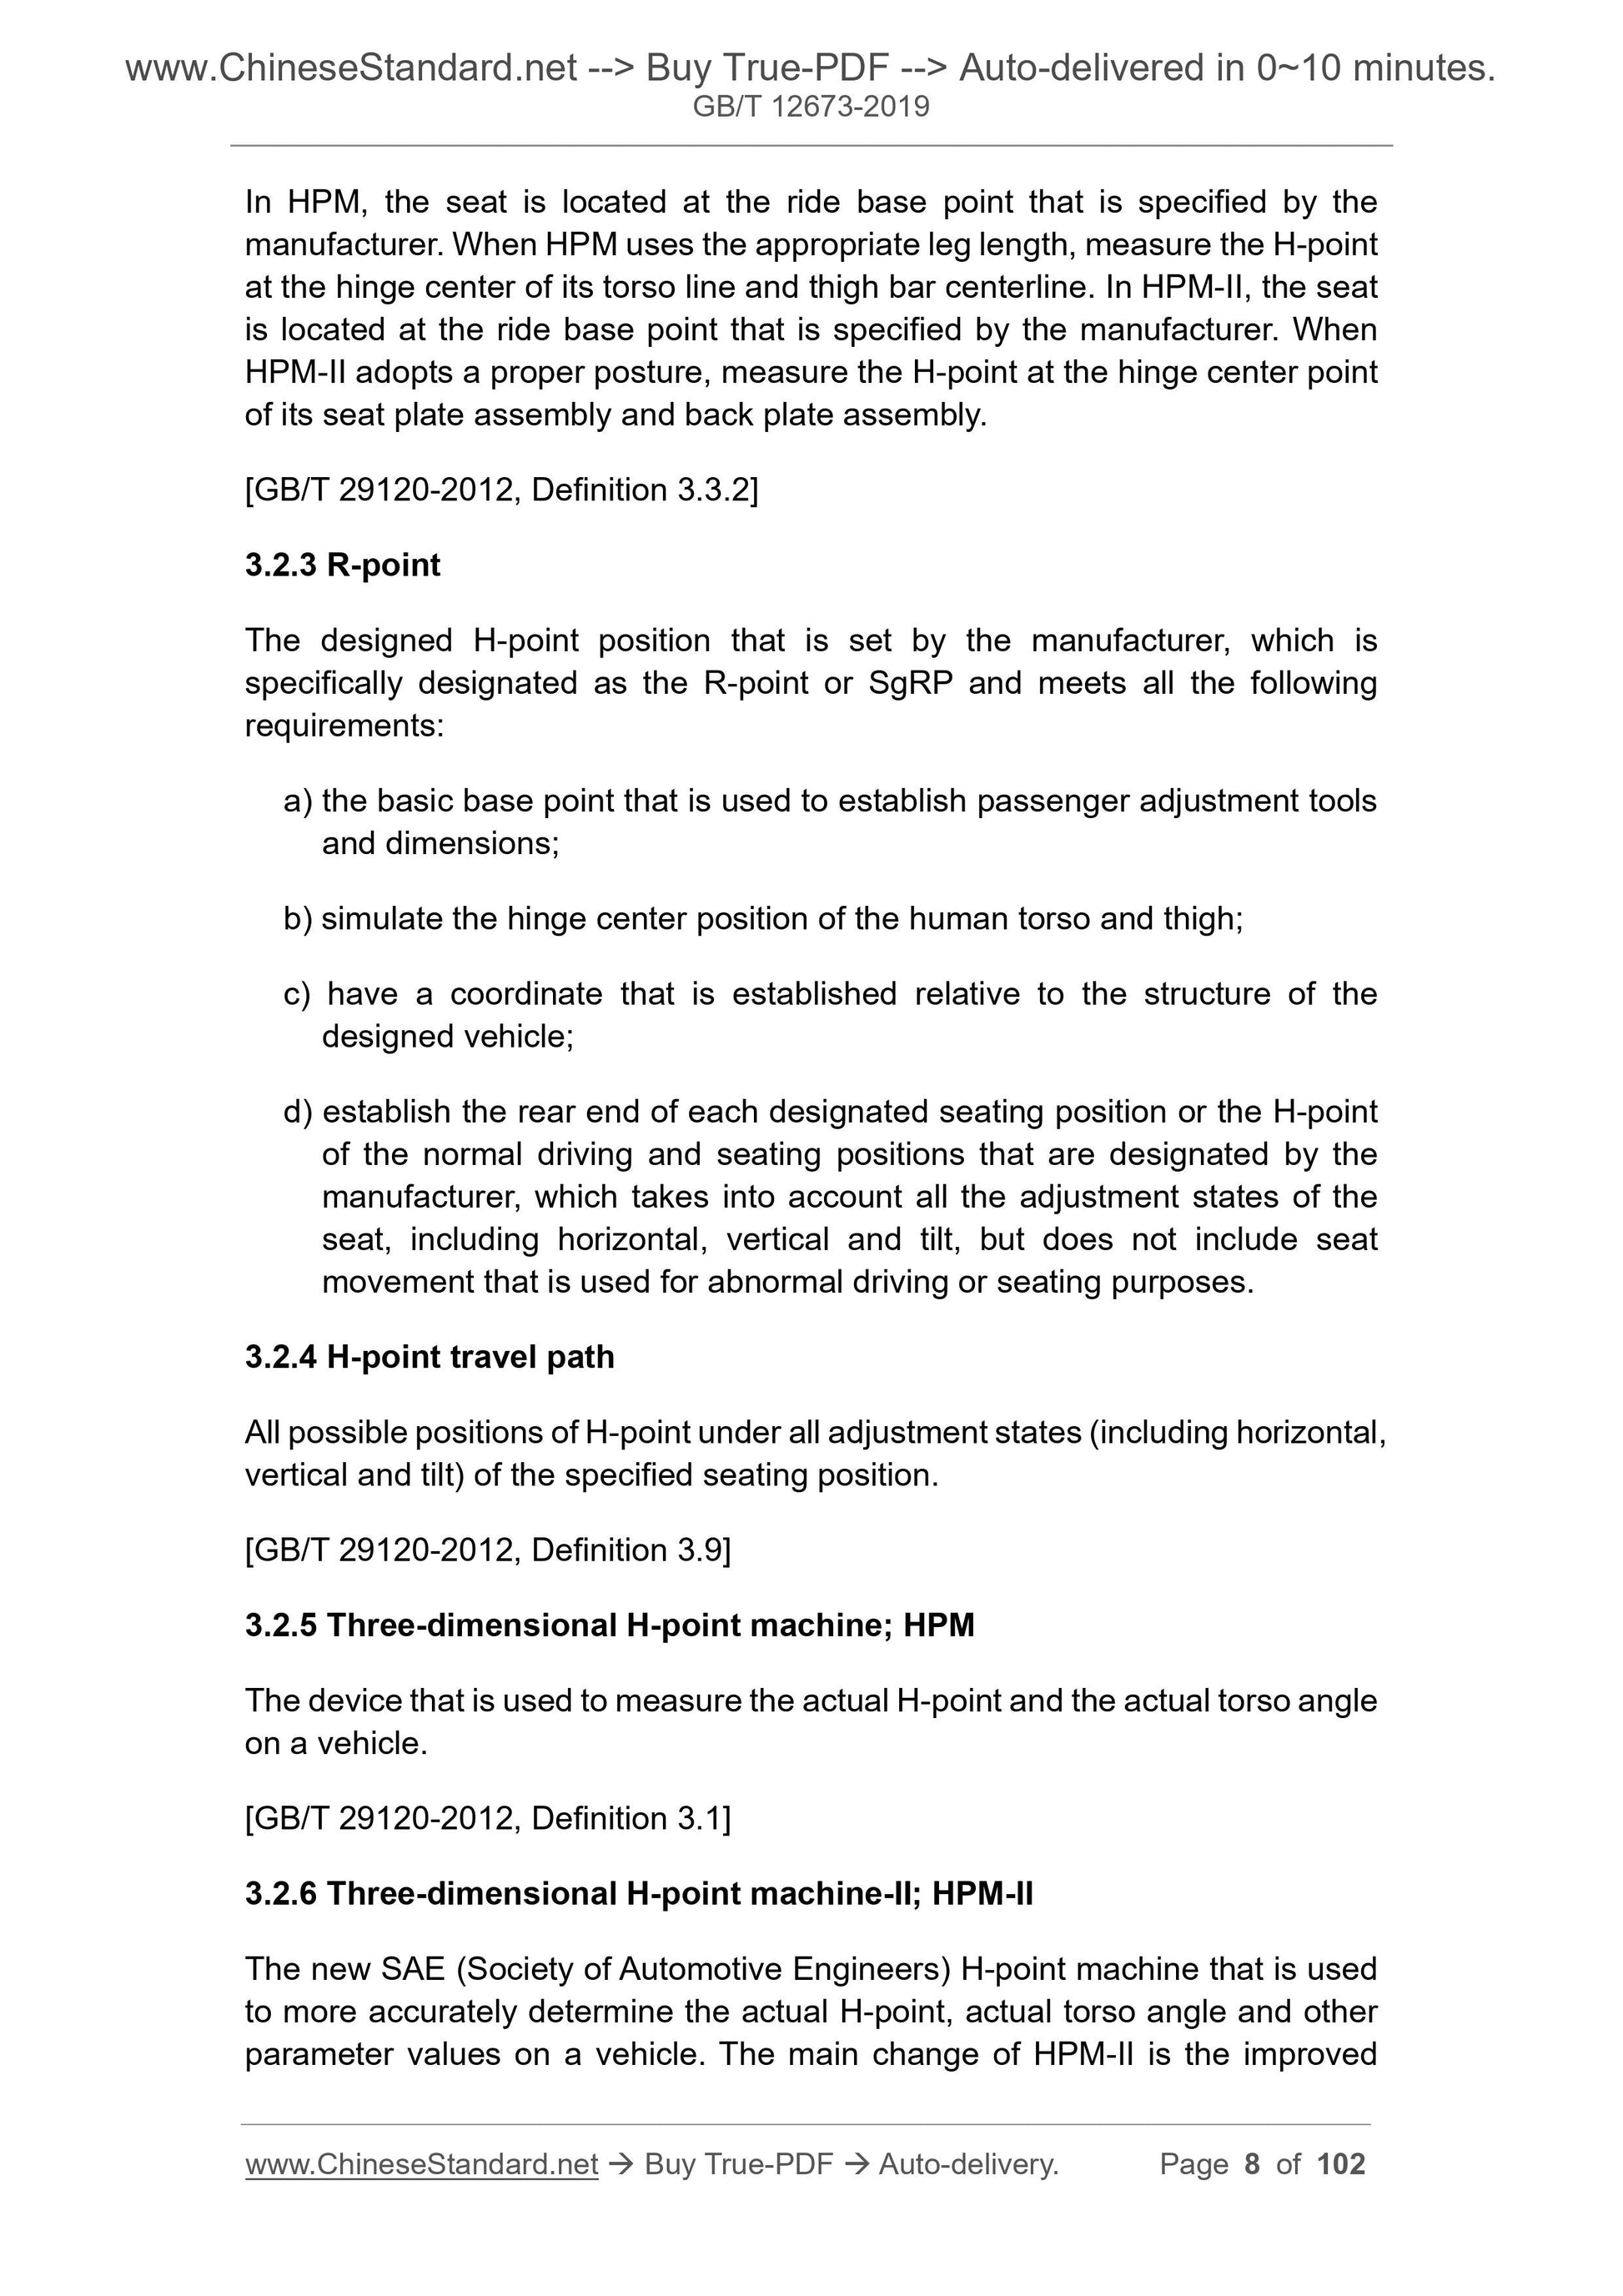 GB/T 12673-2019 Page 4